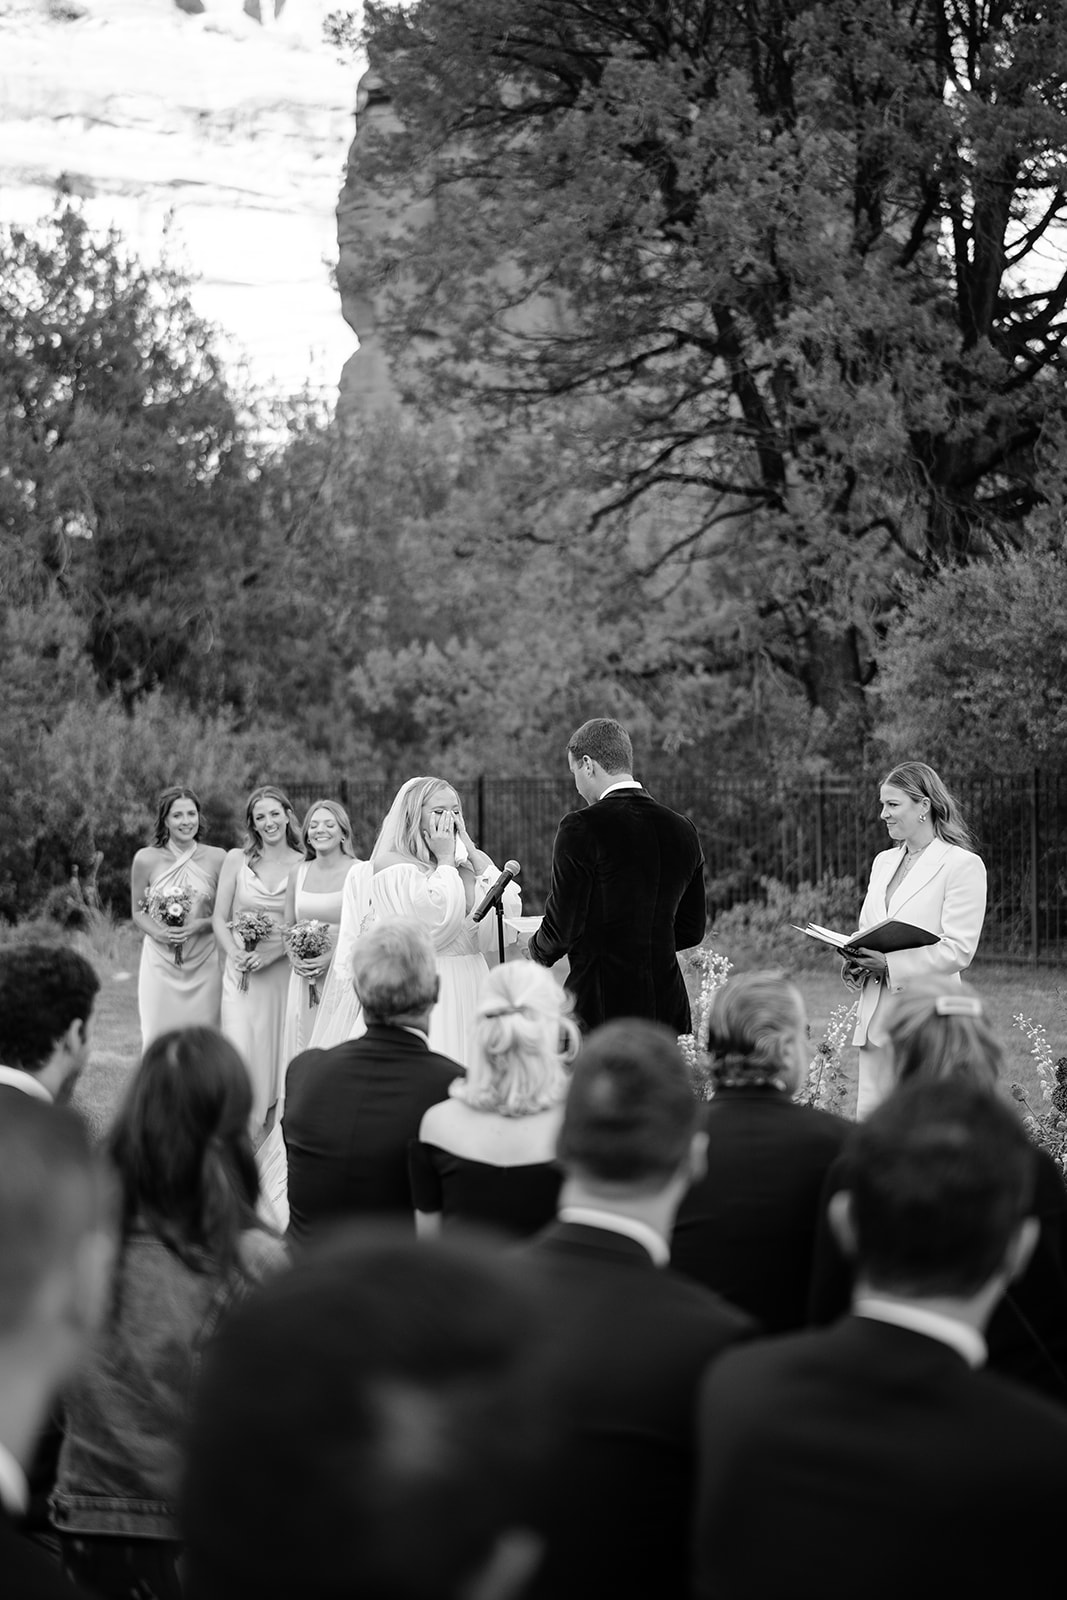 Bride and groom exchaging vows from far away